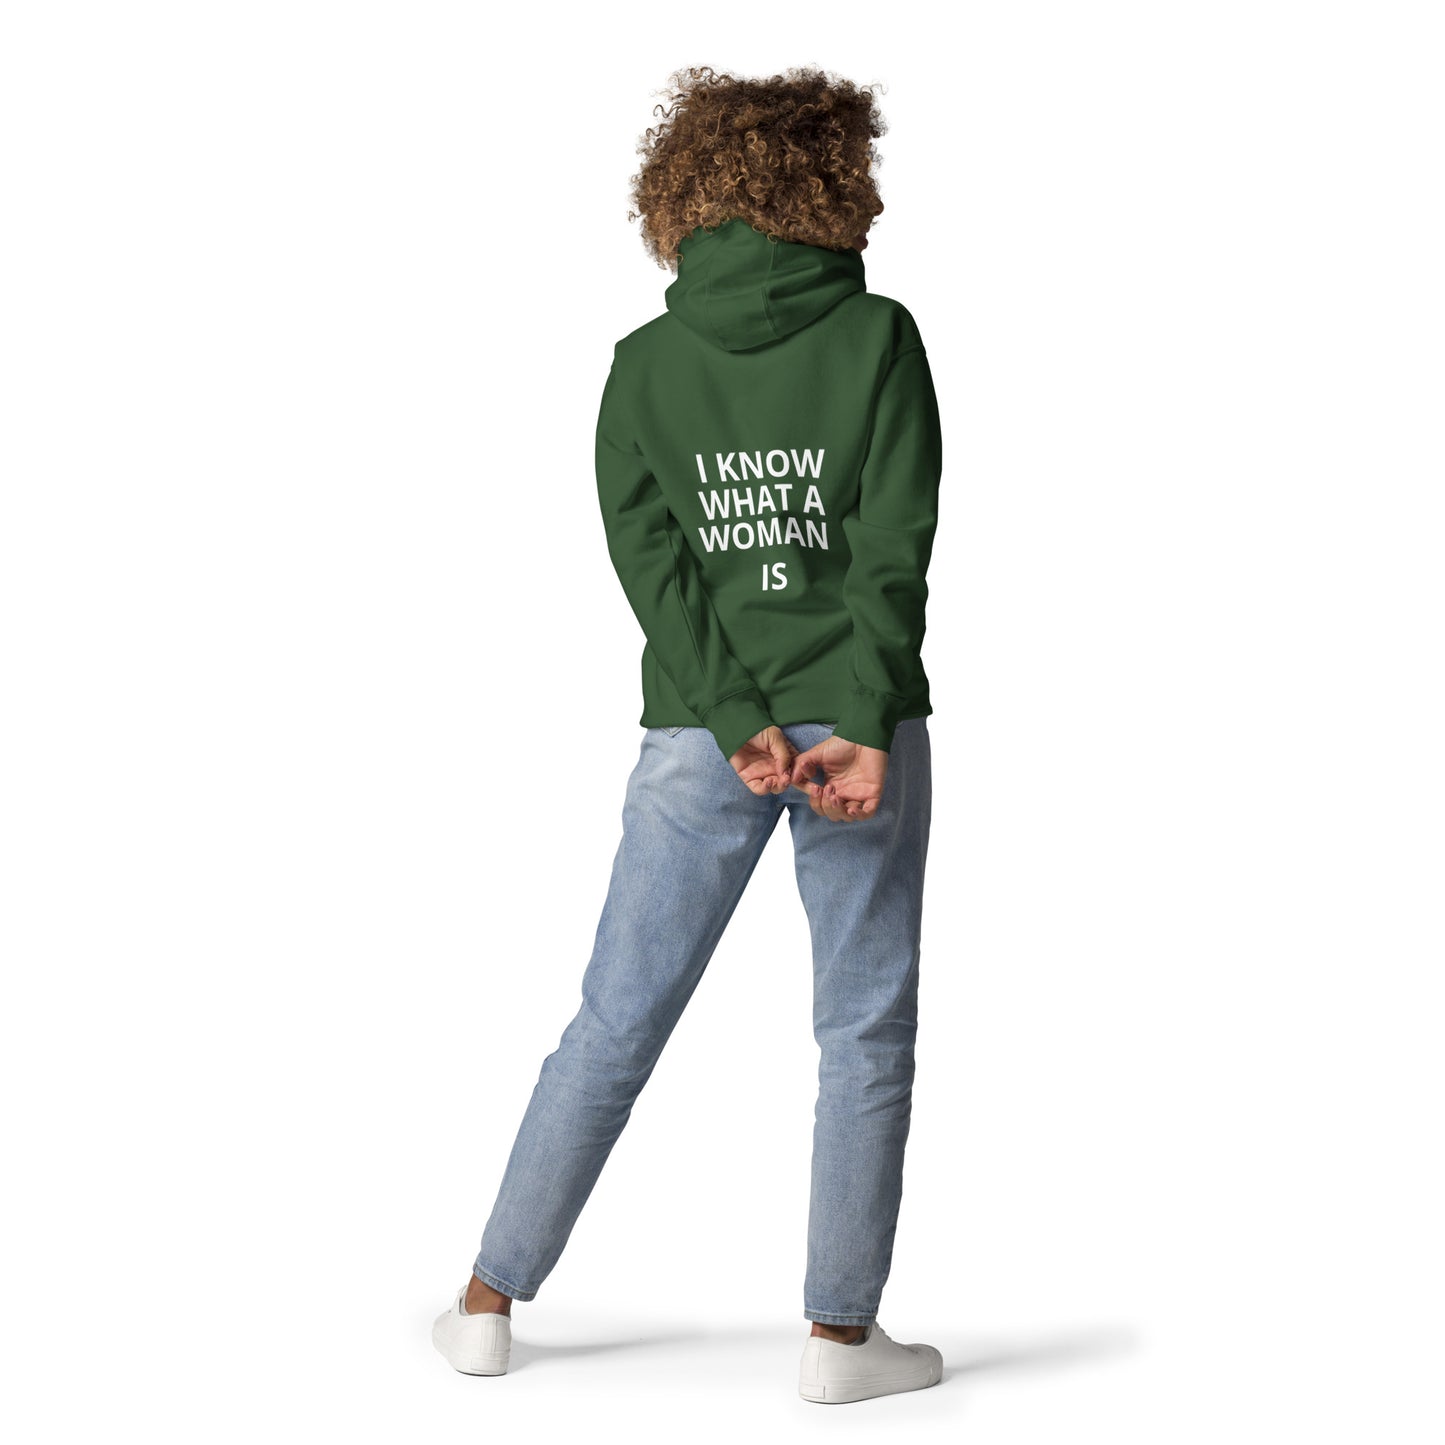 I KNOW WHAT A WOMAN IS HOODIE